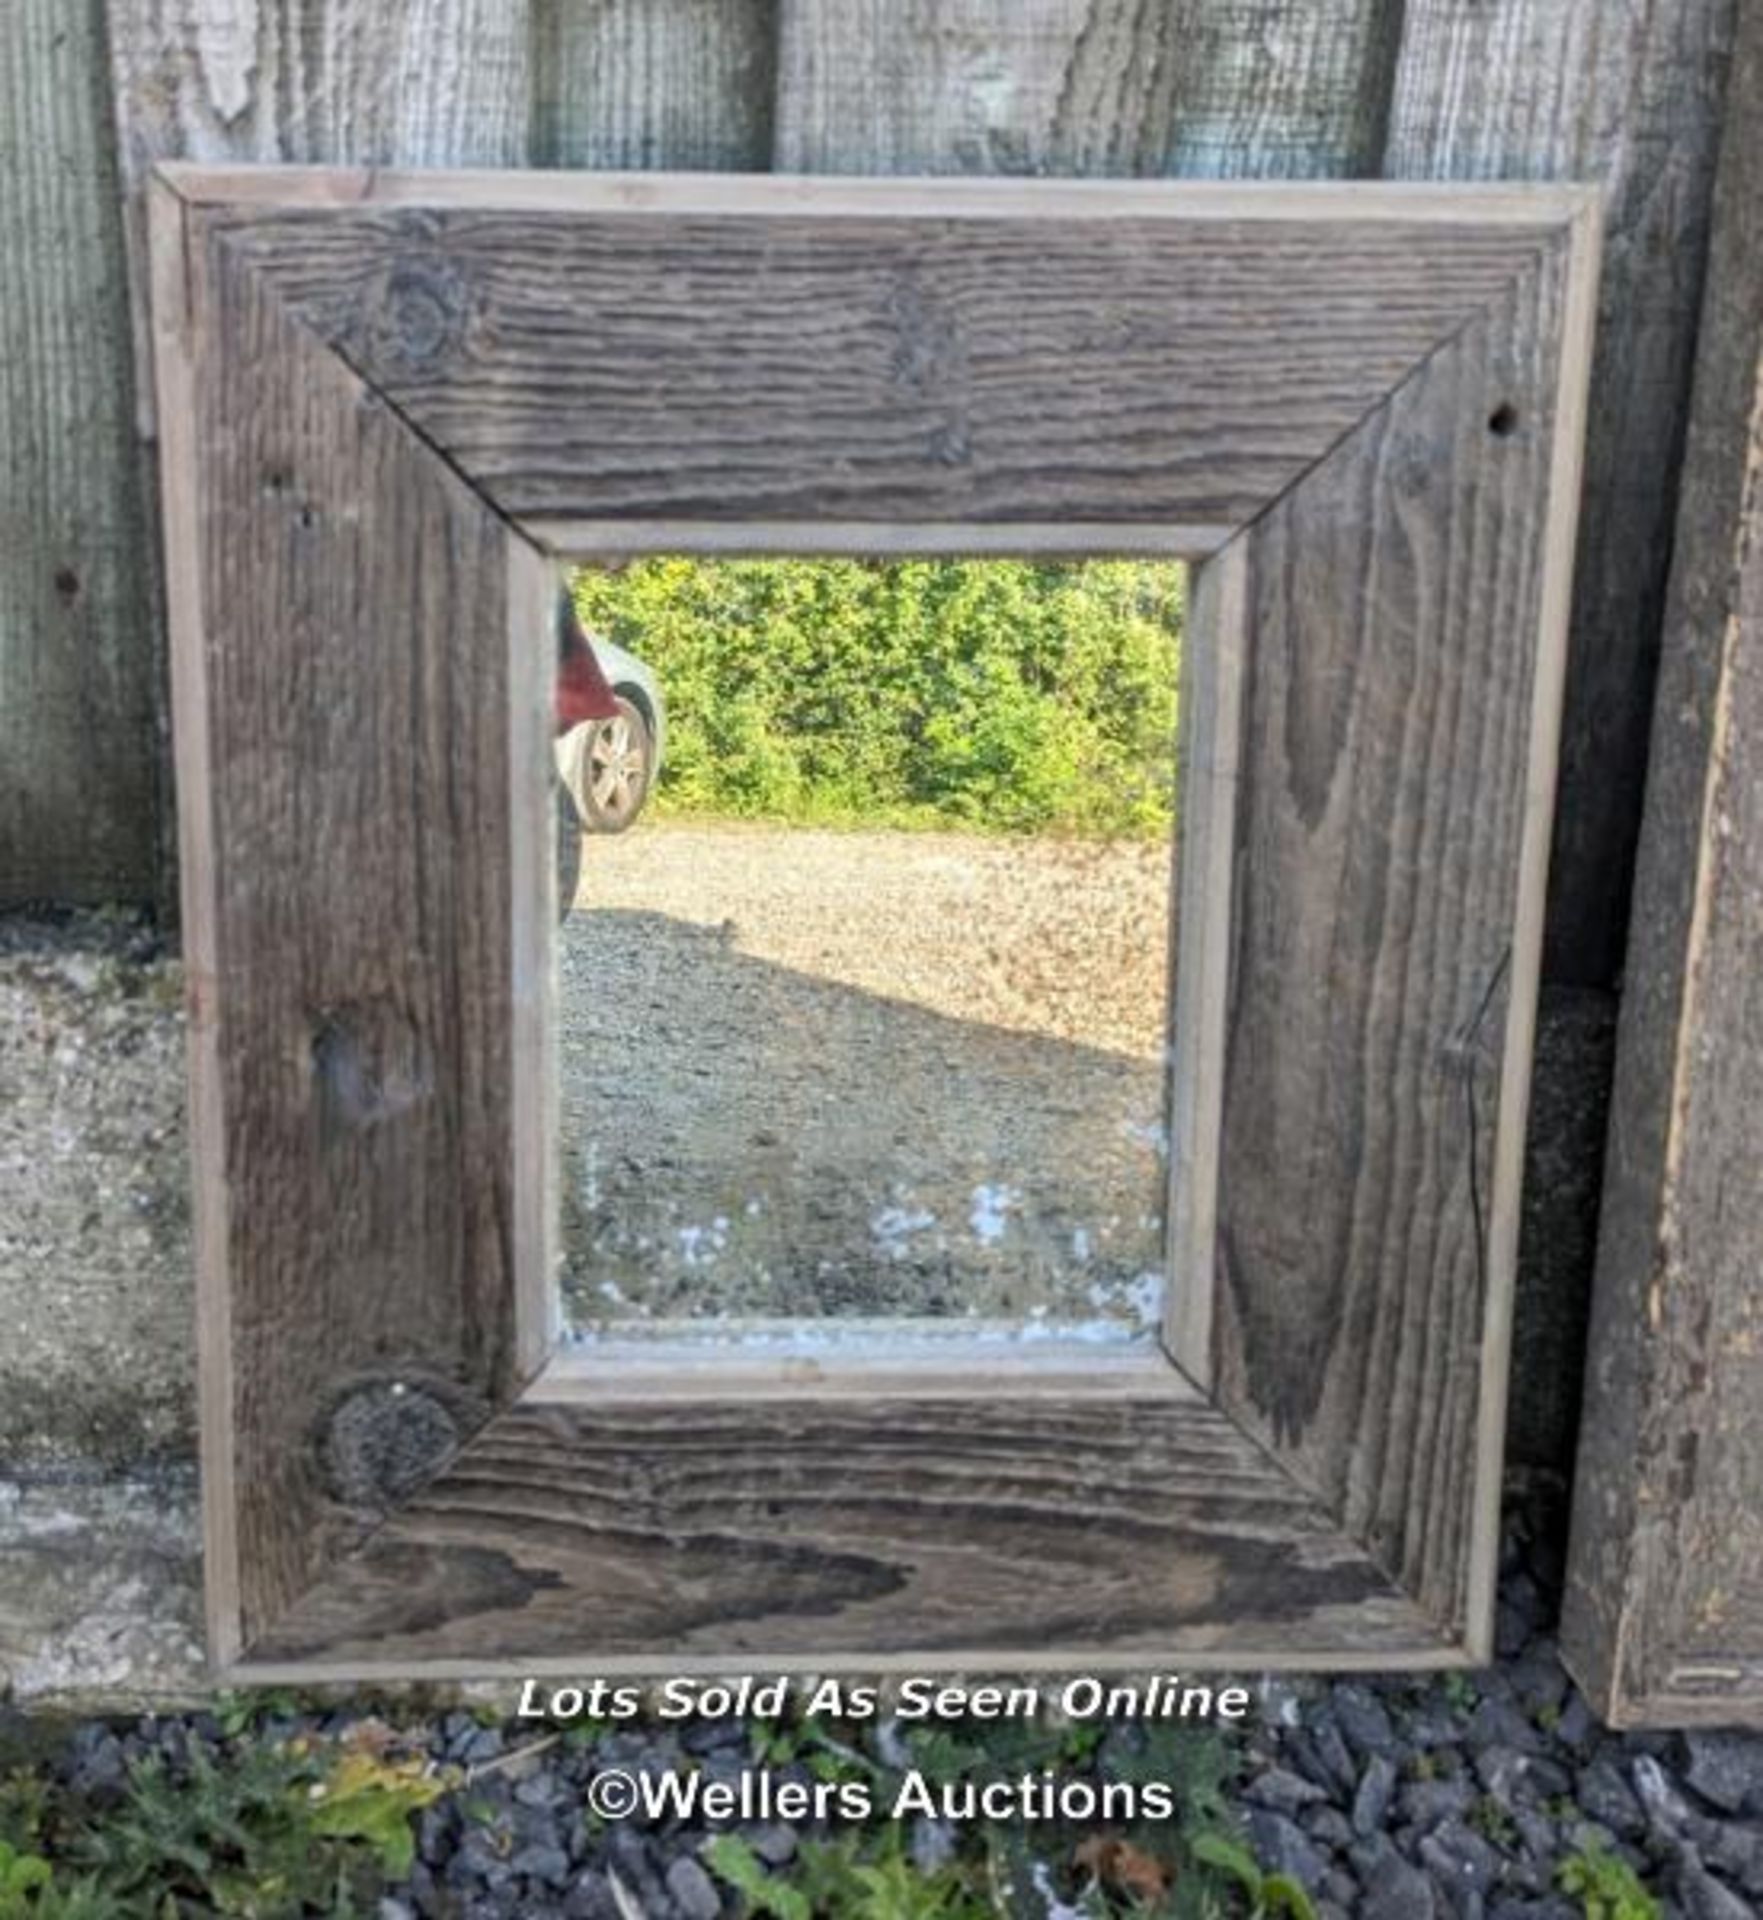 2 reclaimed and rustic pine mirrors with old mirror glass - Image 3 of 6